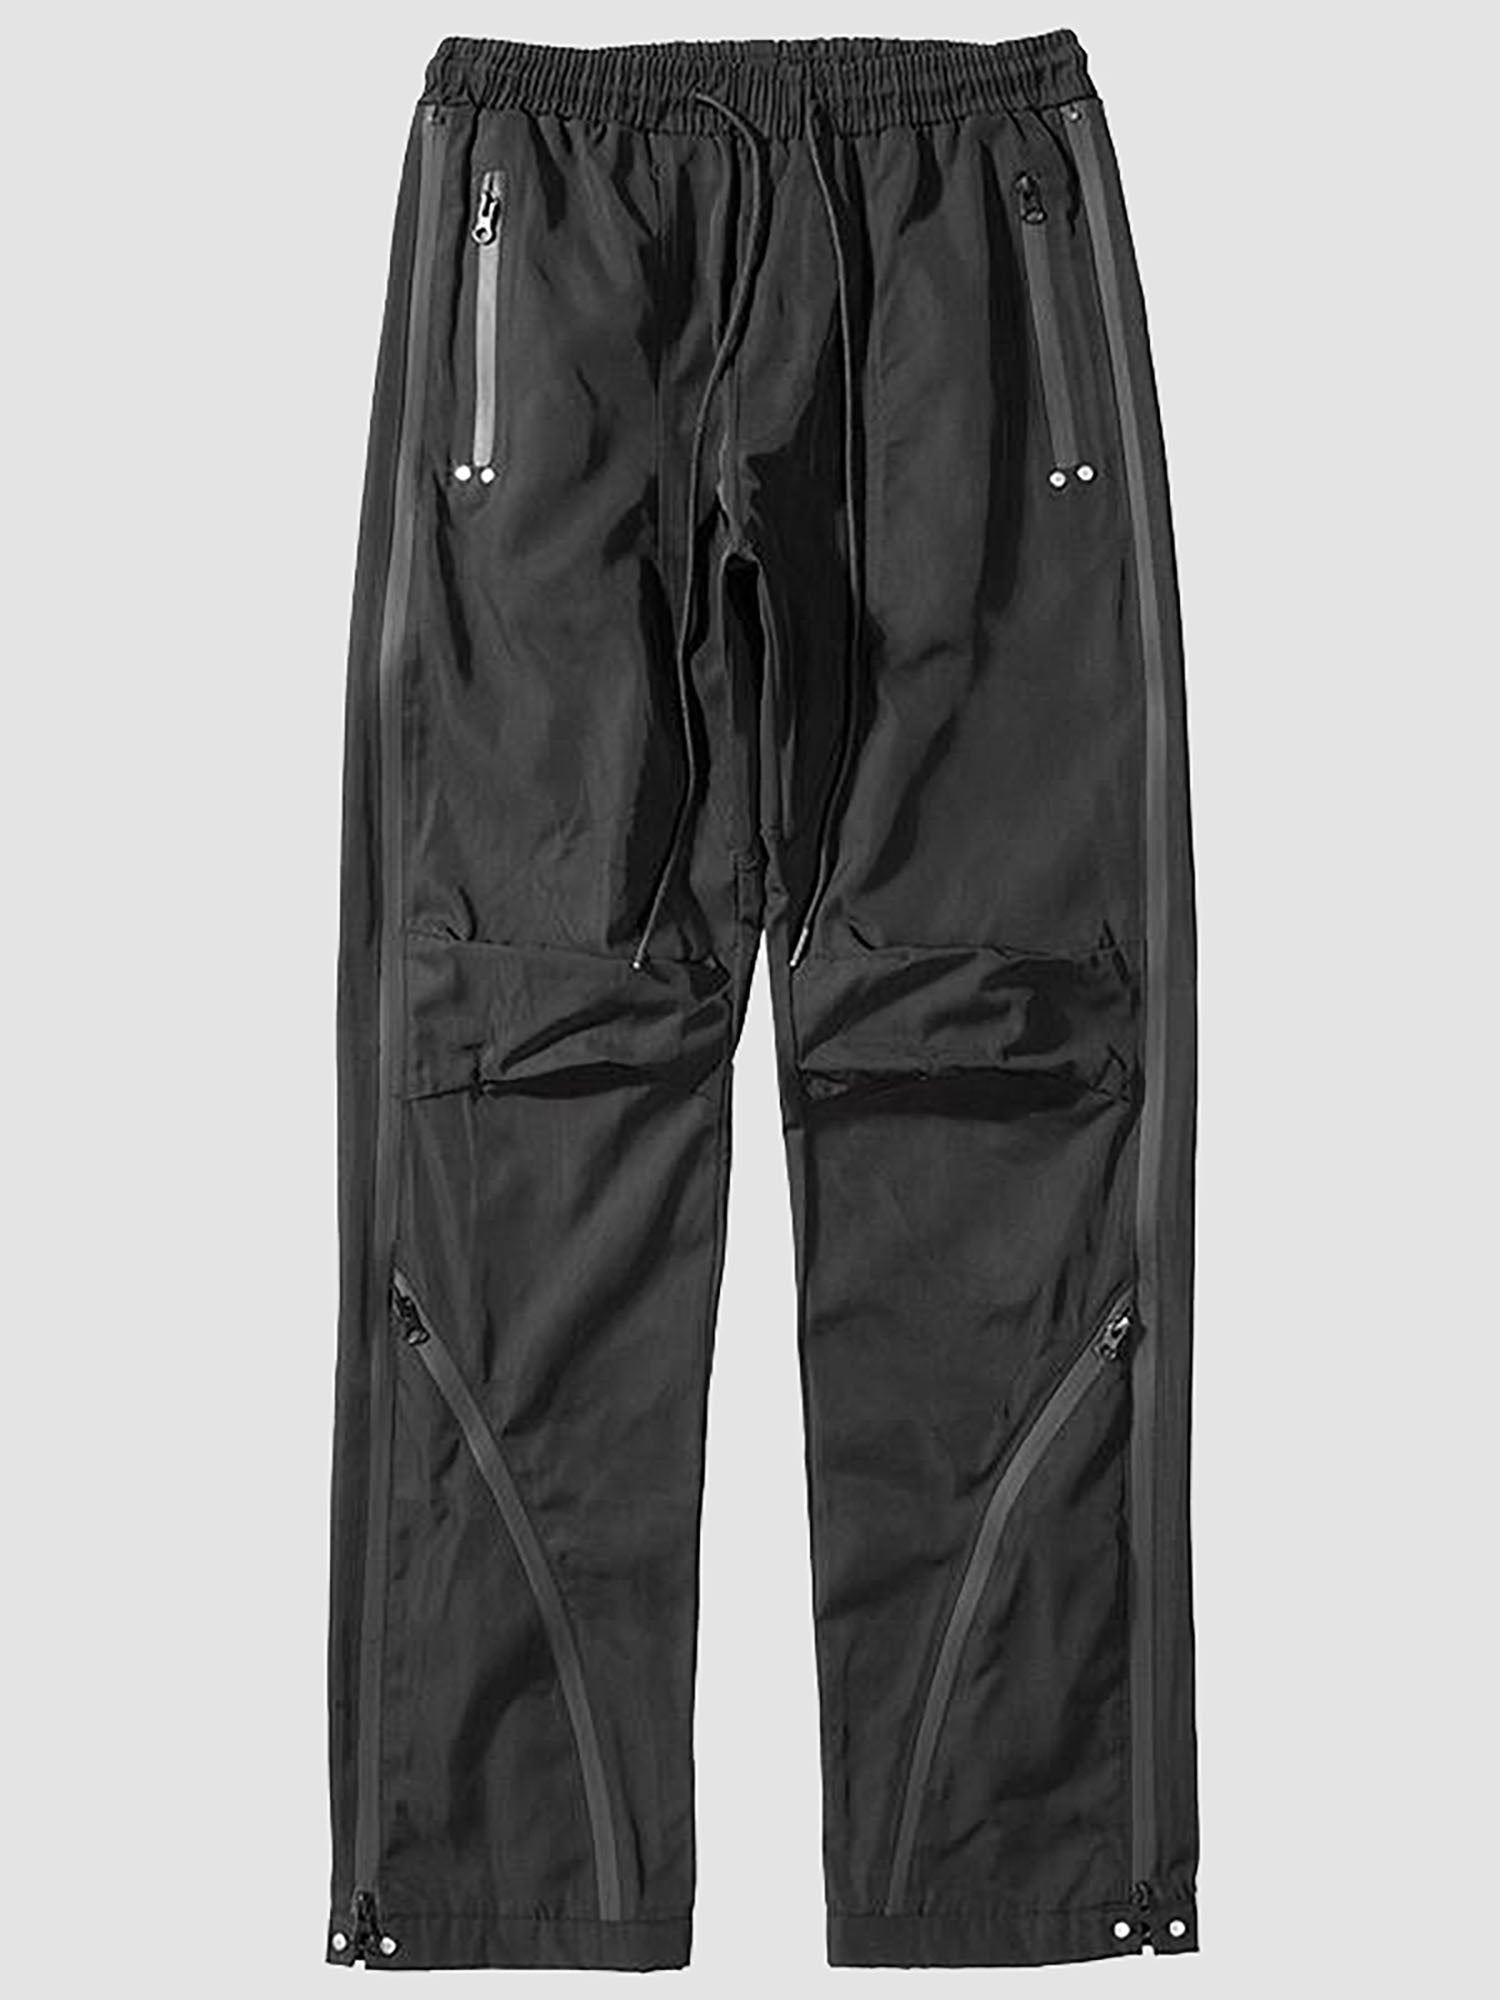 JUSTNOTAG Functional Nylon Double Side Zippers Joggers